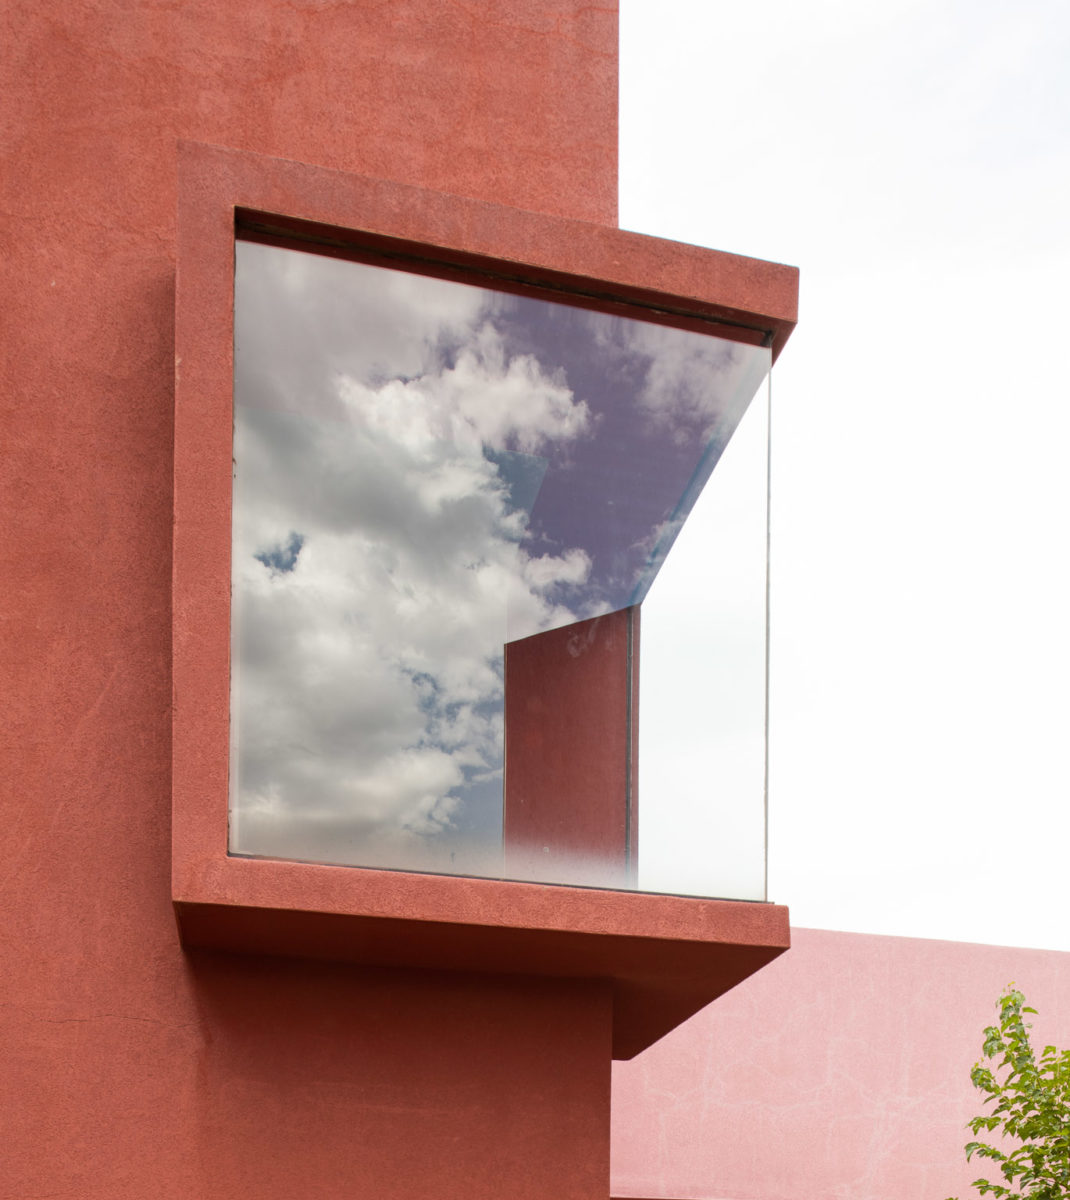 Architectural photography in Santa Fe, New Mexico